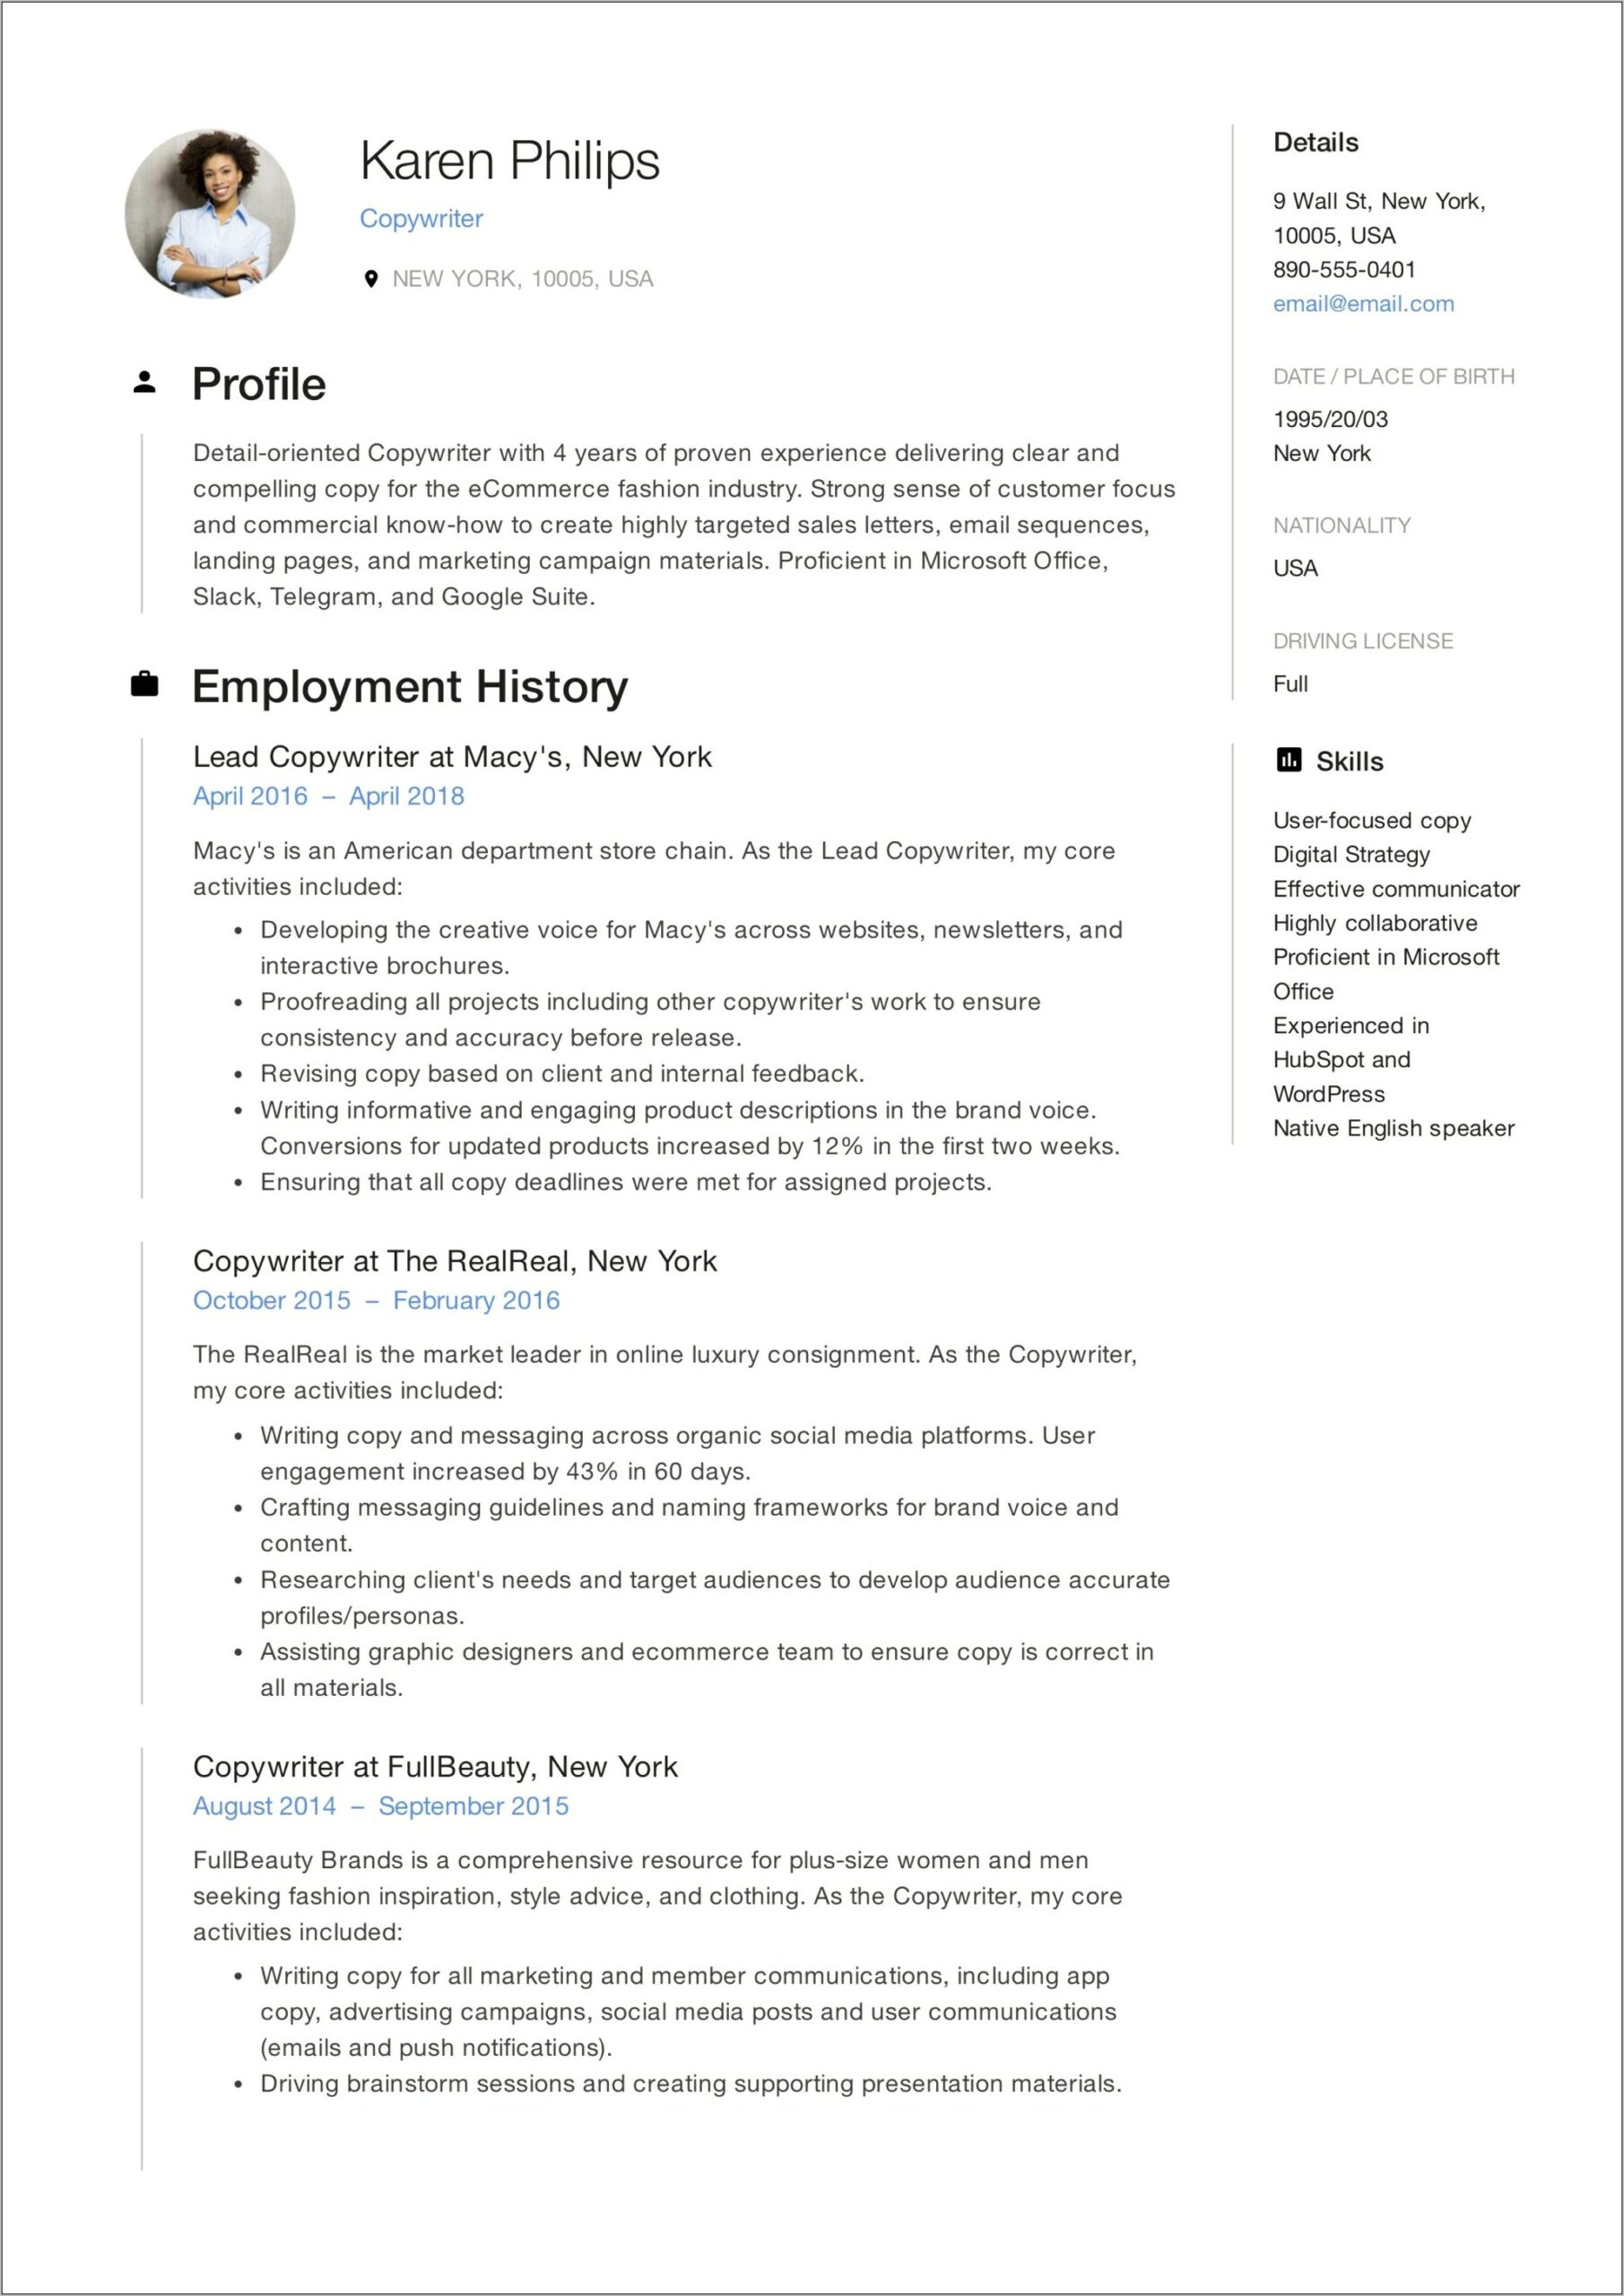 Resume Summary Statement For Copywriters Examples